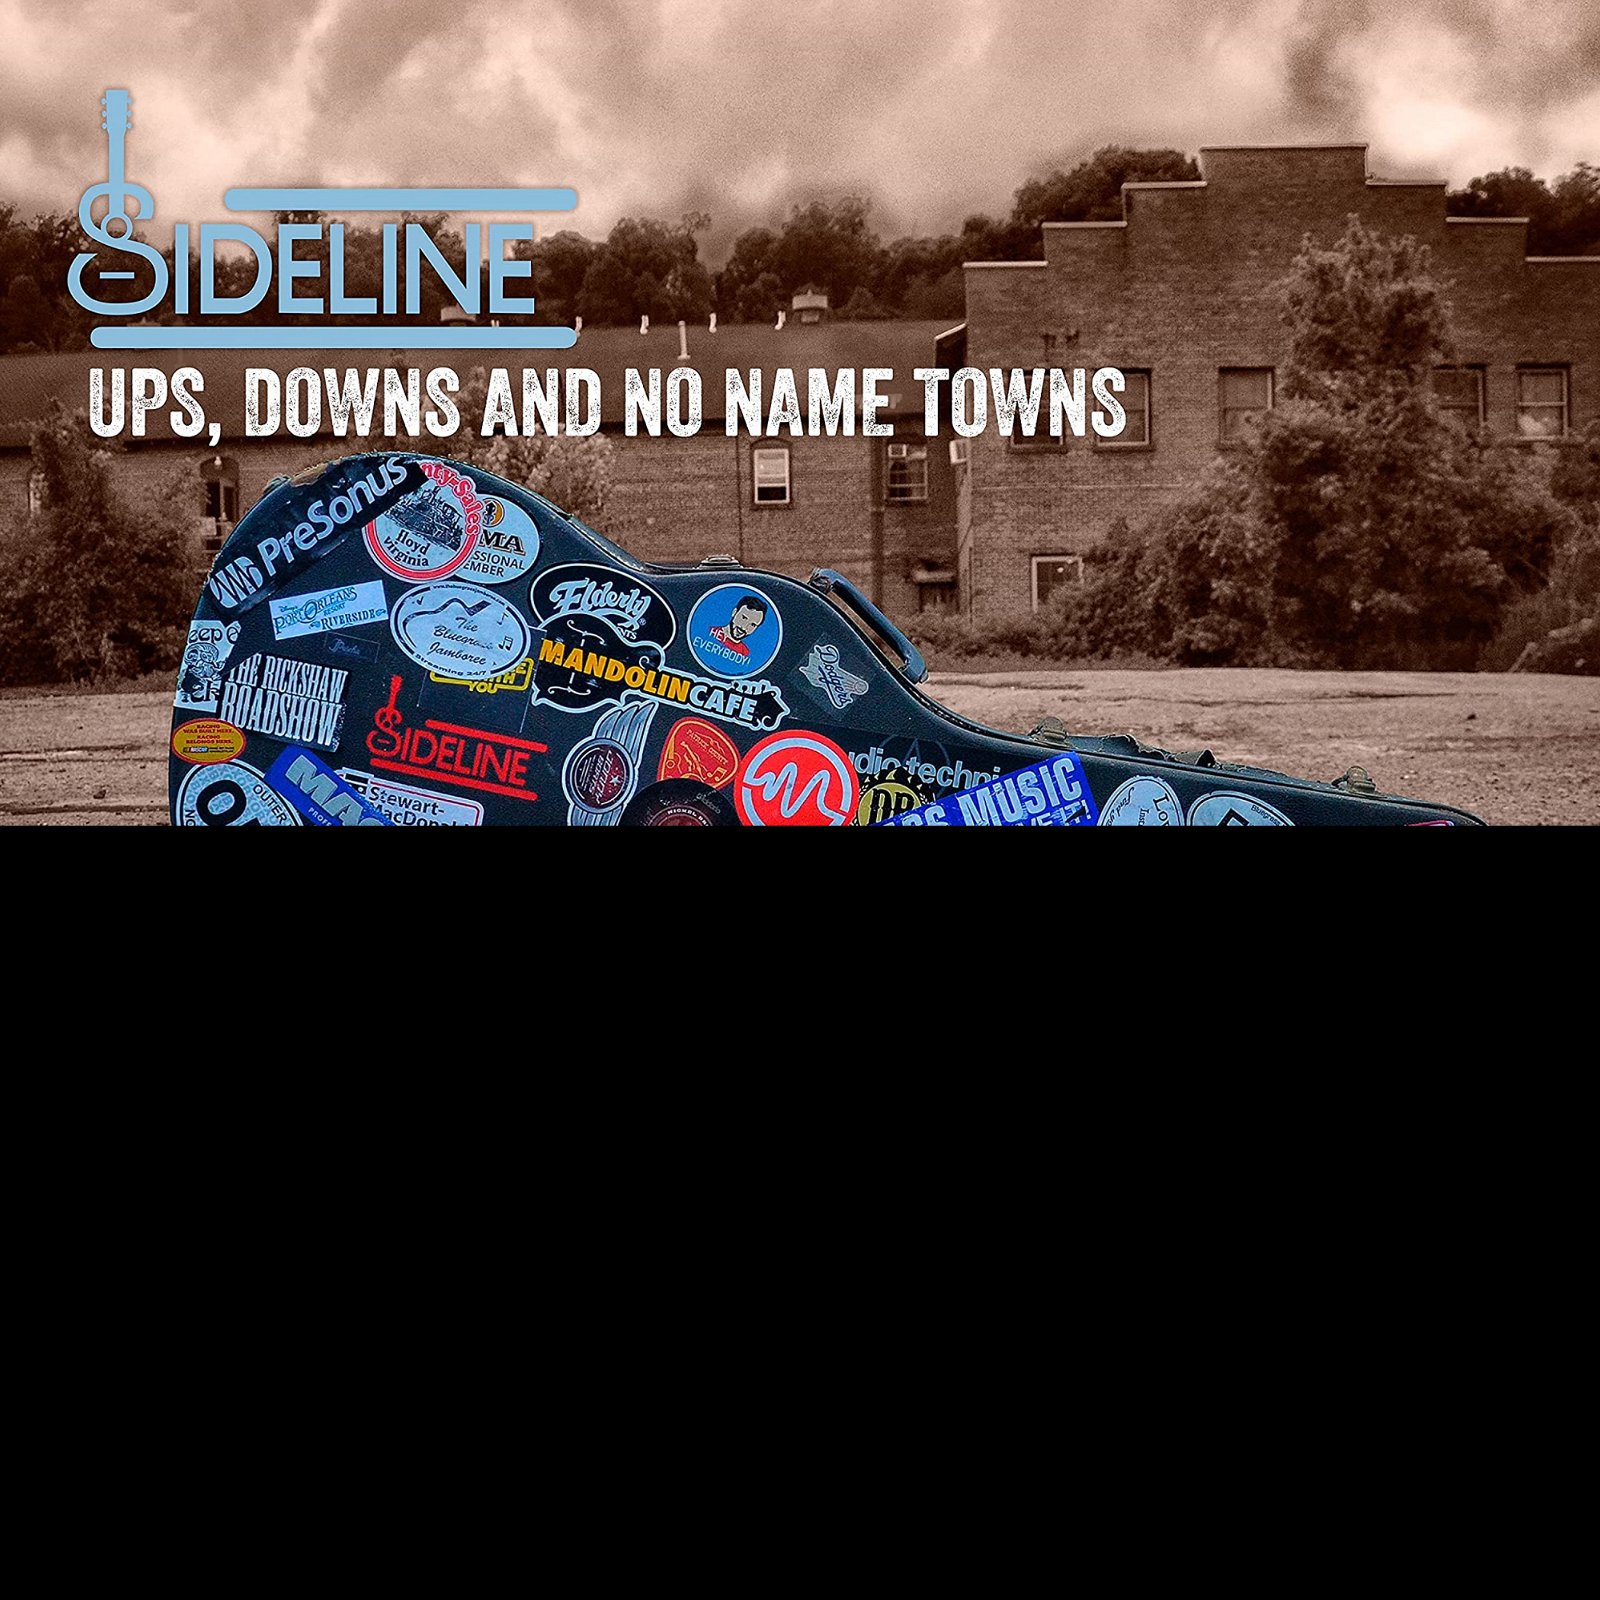 CD Shop - SIDELINE UPS DOWNS & NO NAME TOWNS